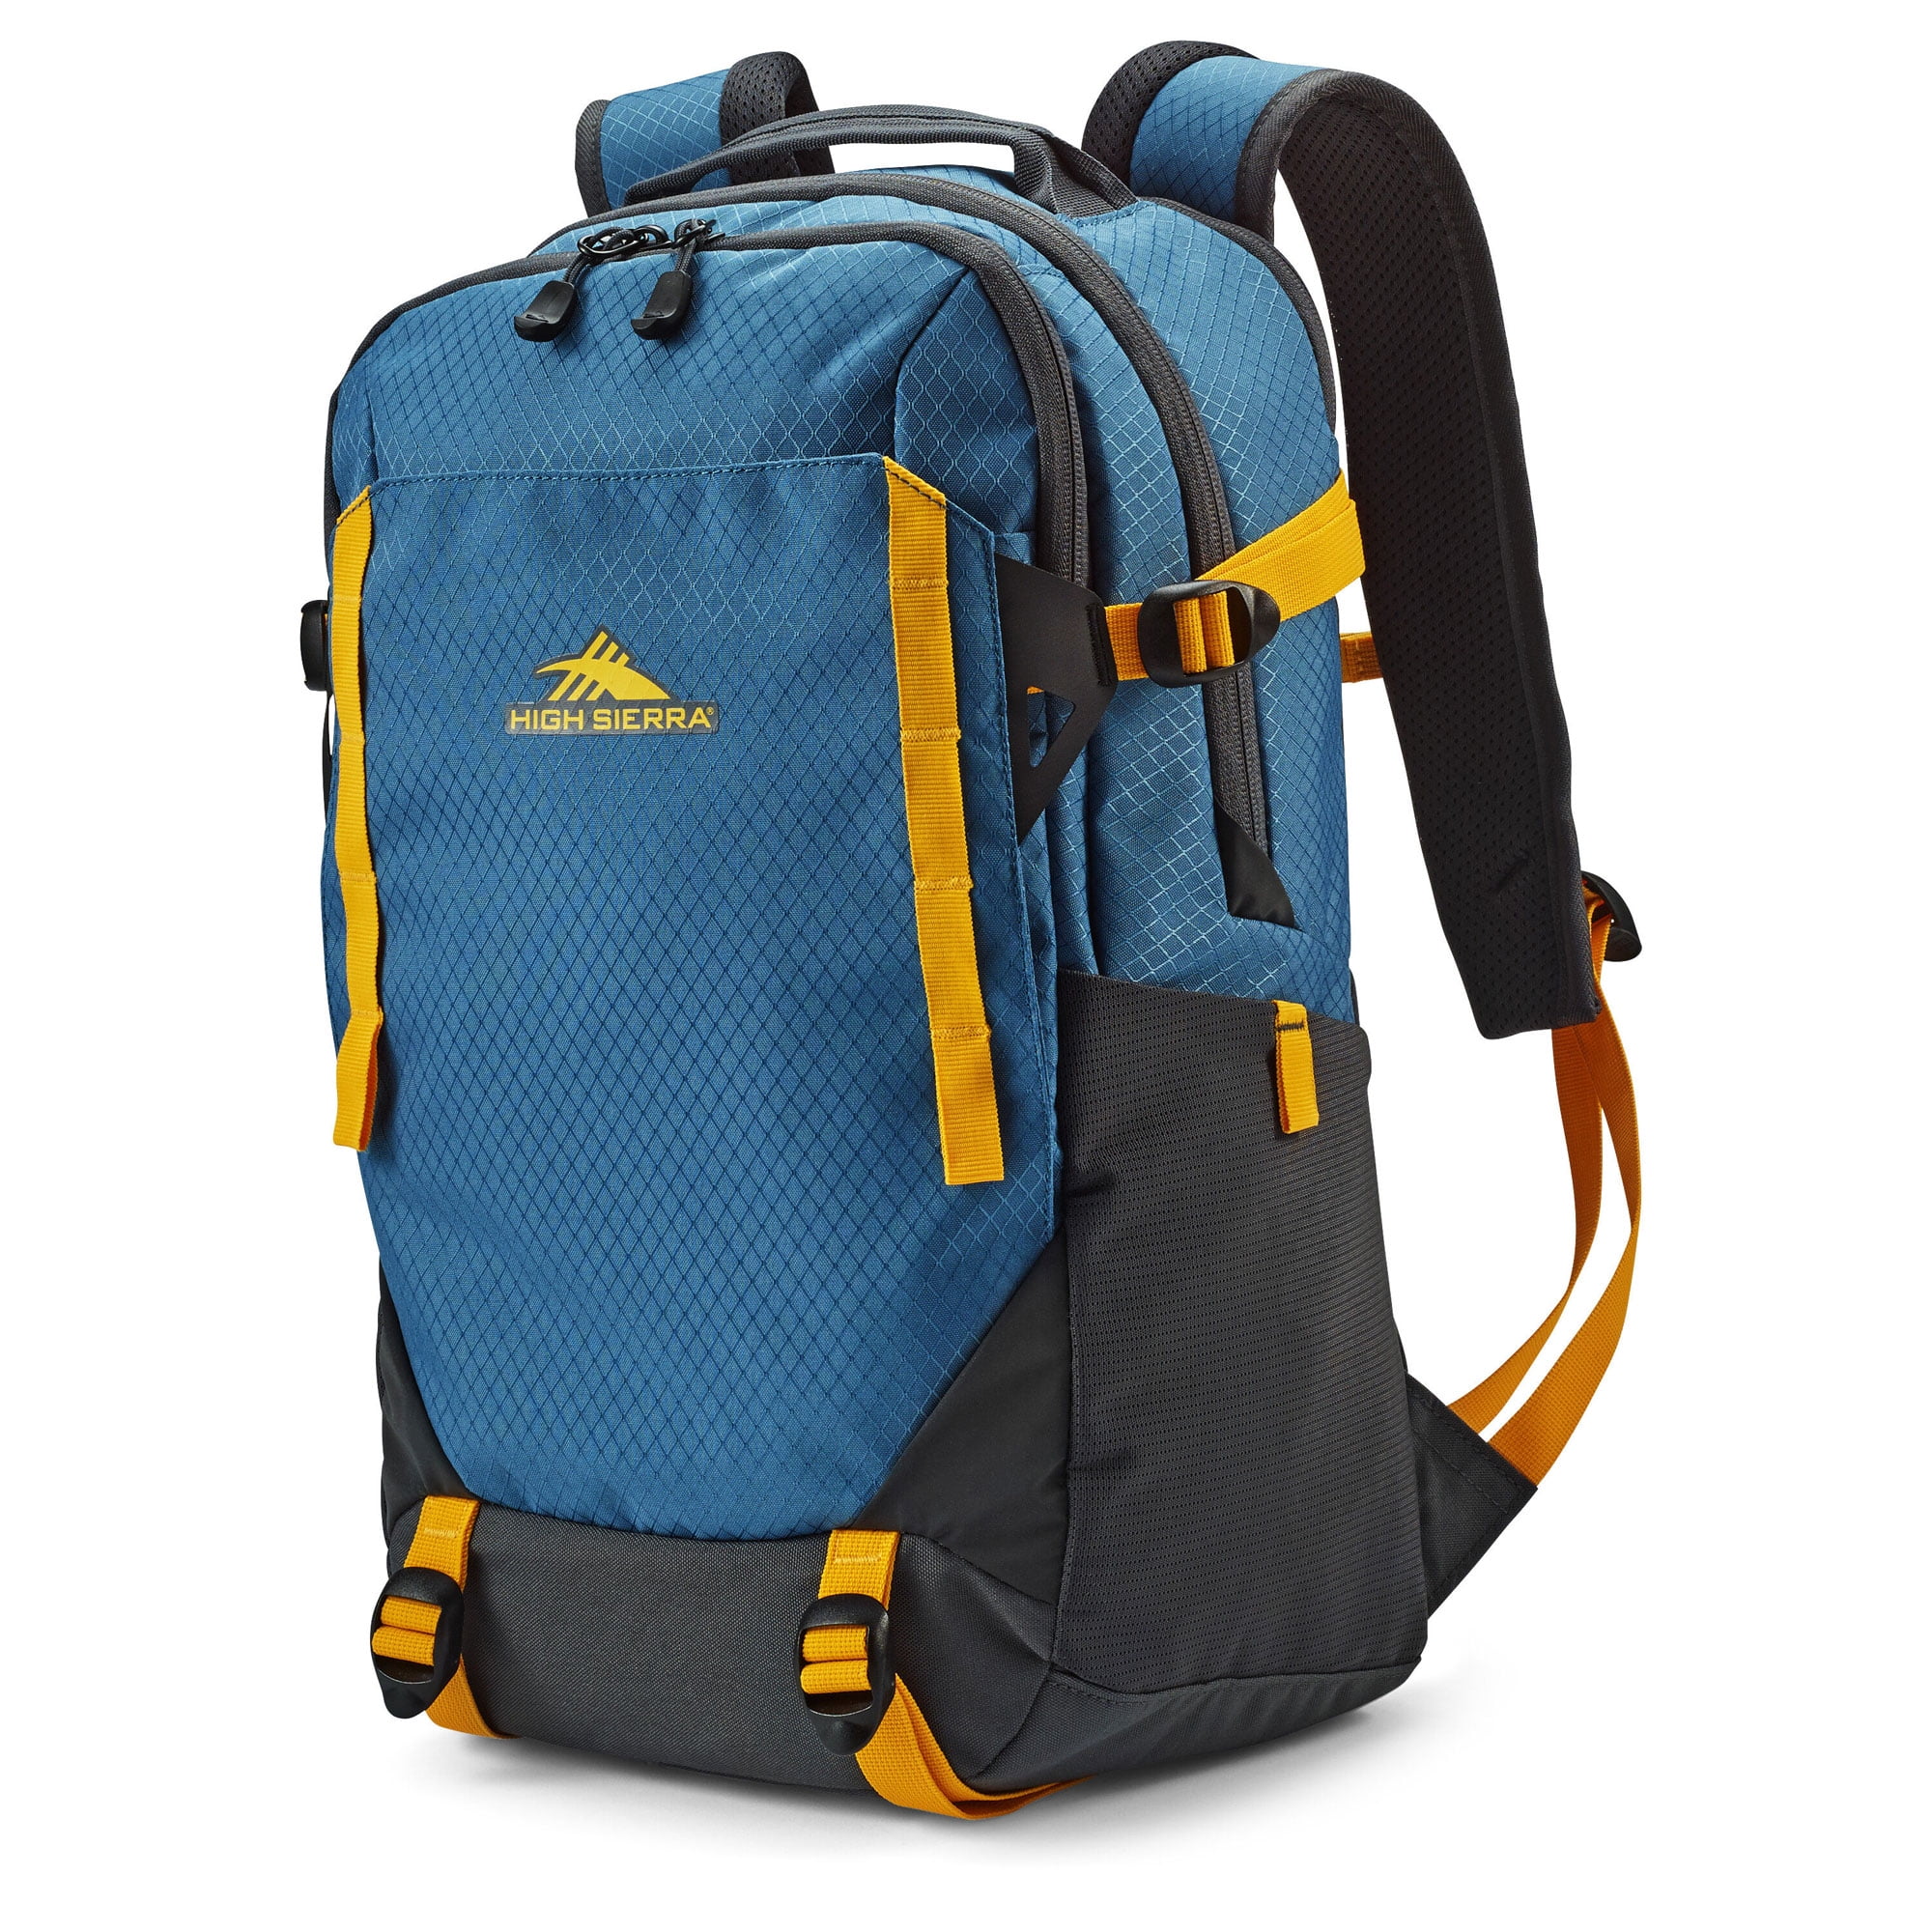 High Sierra Takeover Backpack with Laptop Pocket and Tablet Sleeve, Blue/Yellow